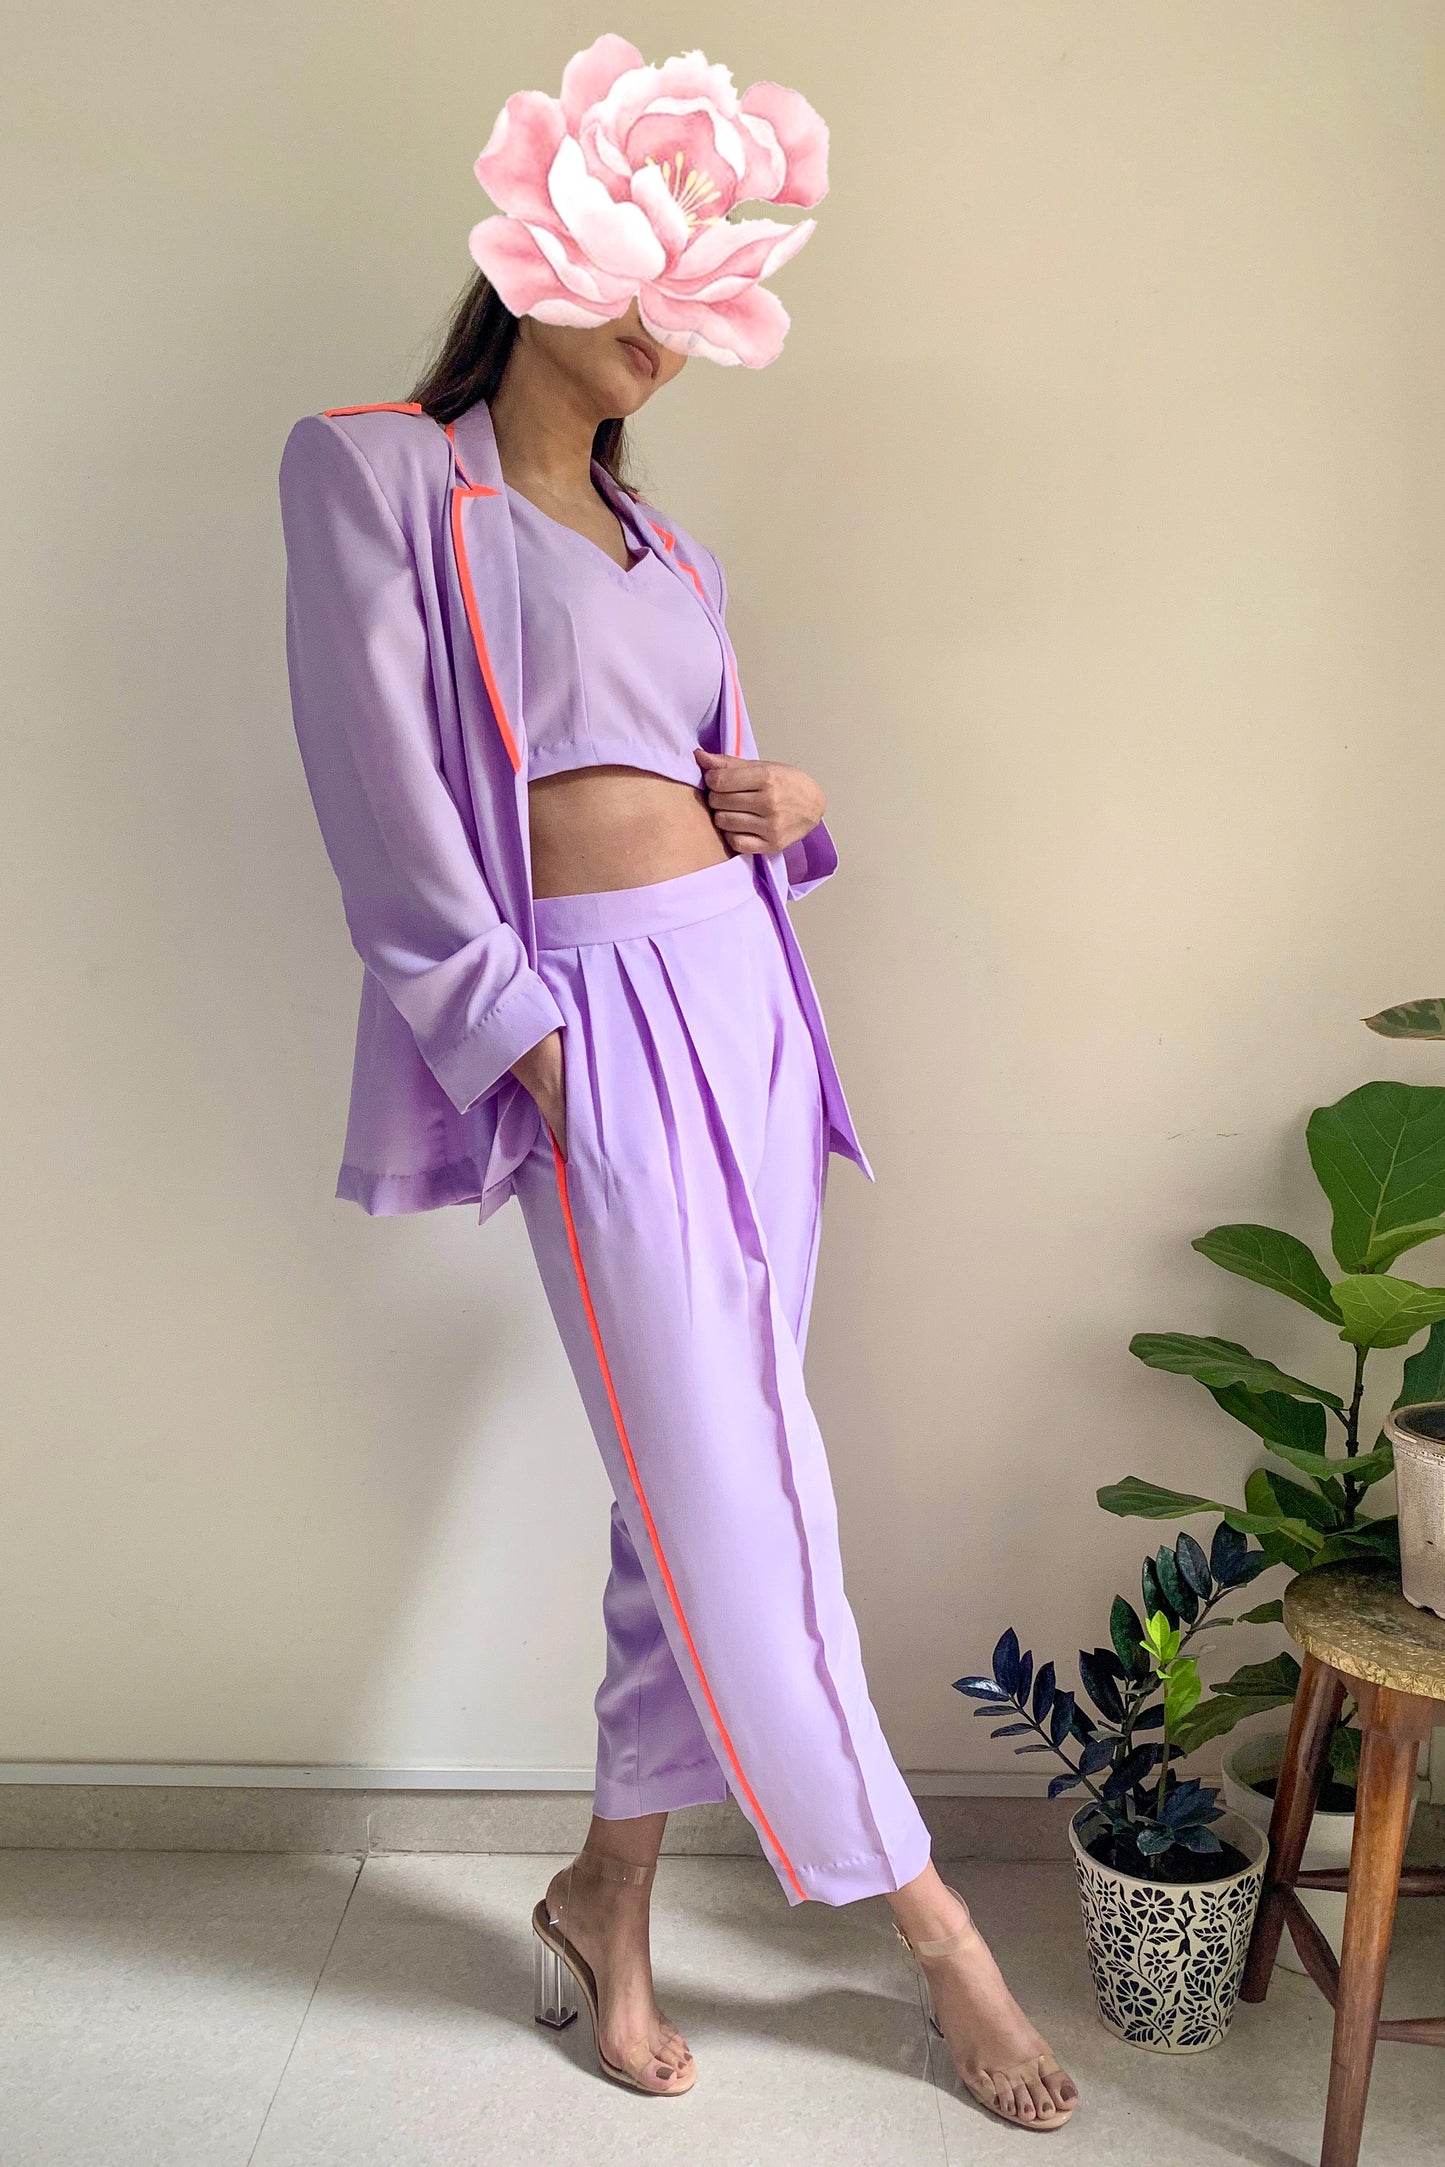 ELLE IN LILAC